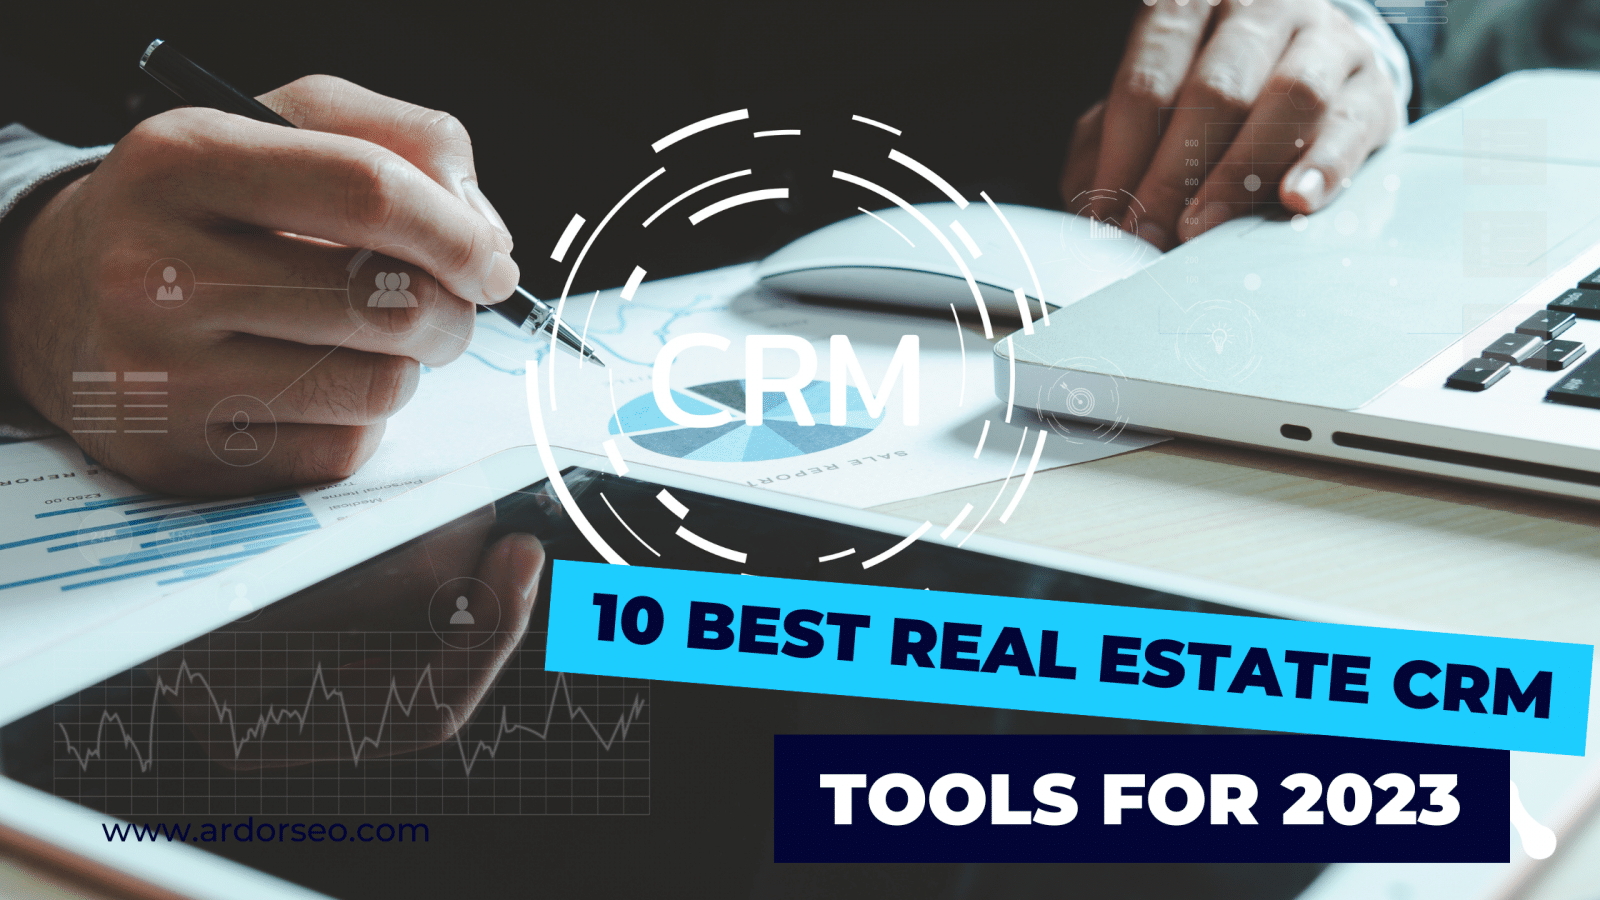 Successful realtors use CRM To ease their tasks